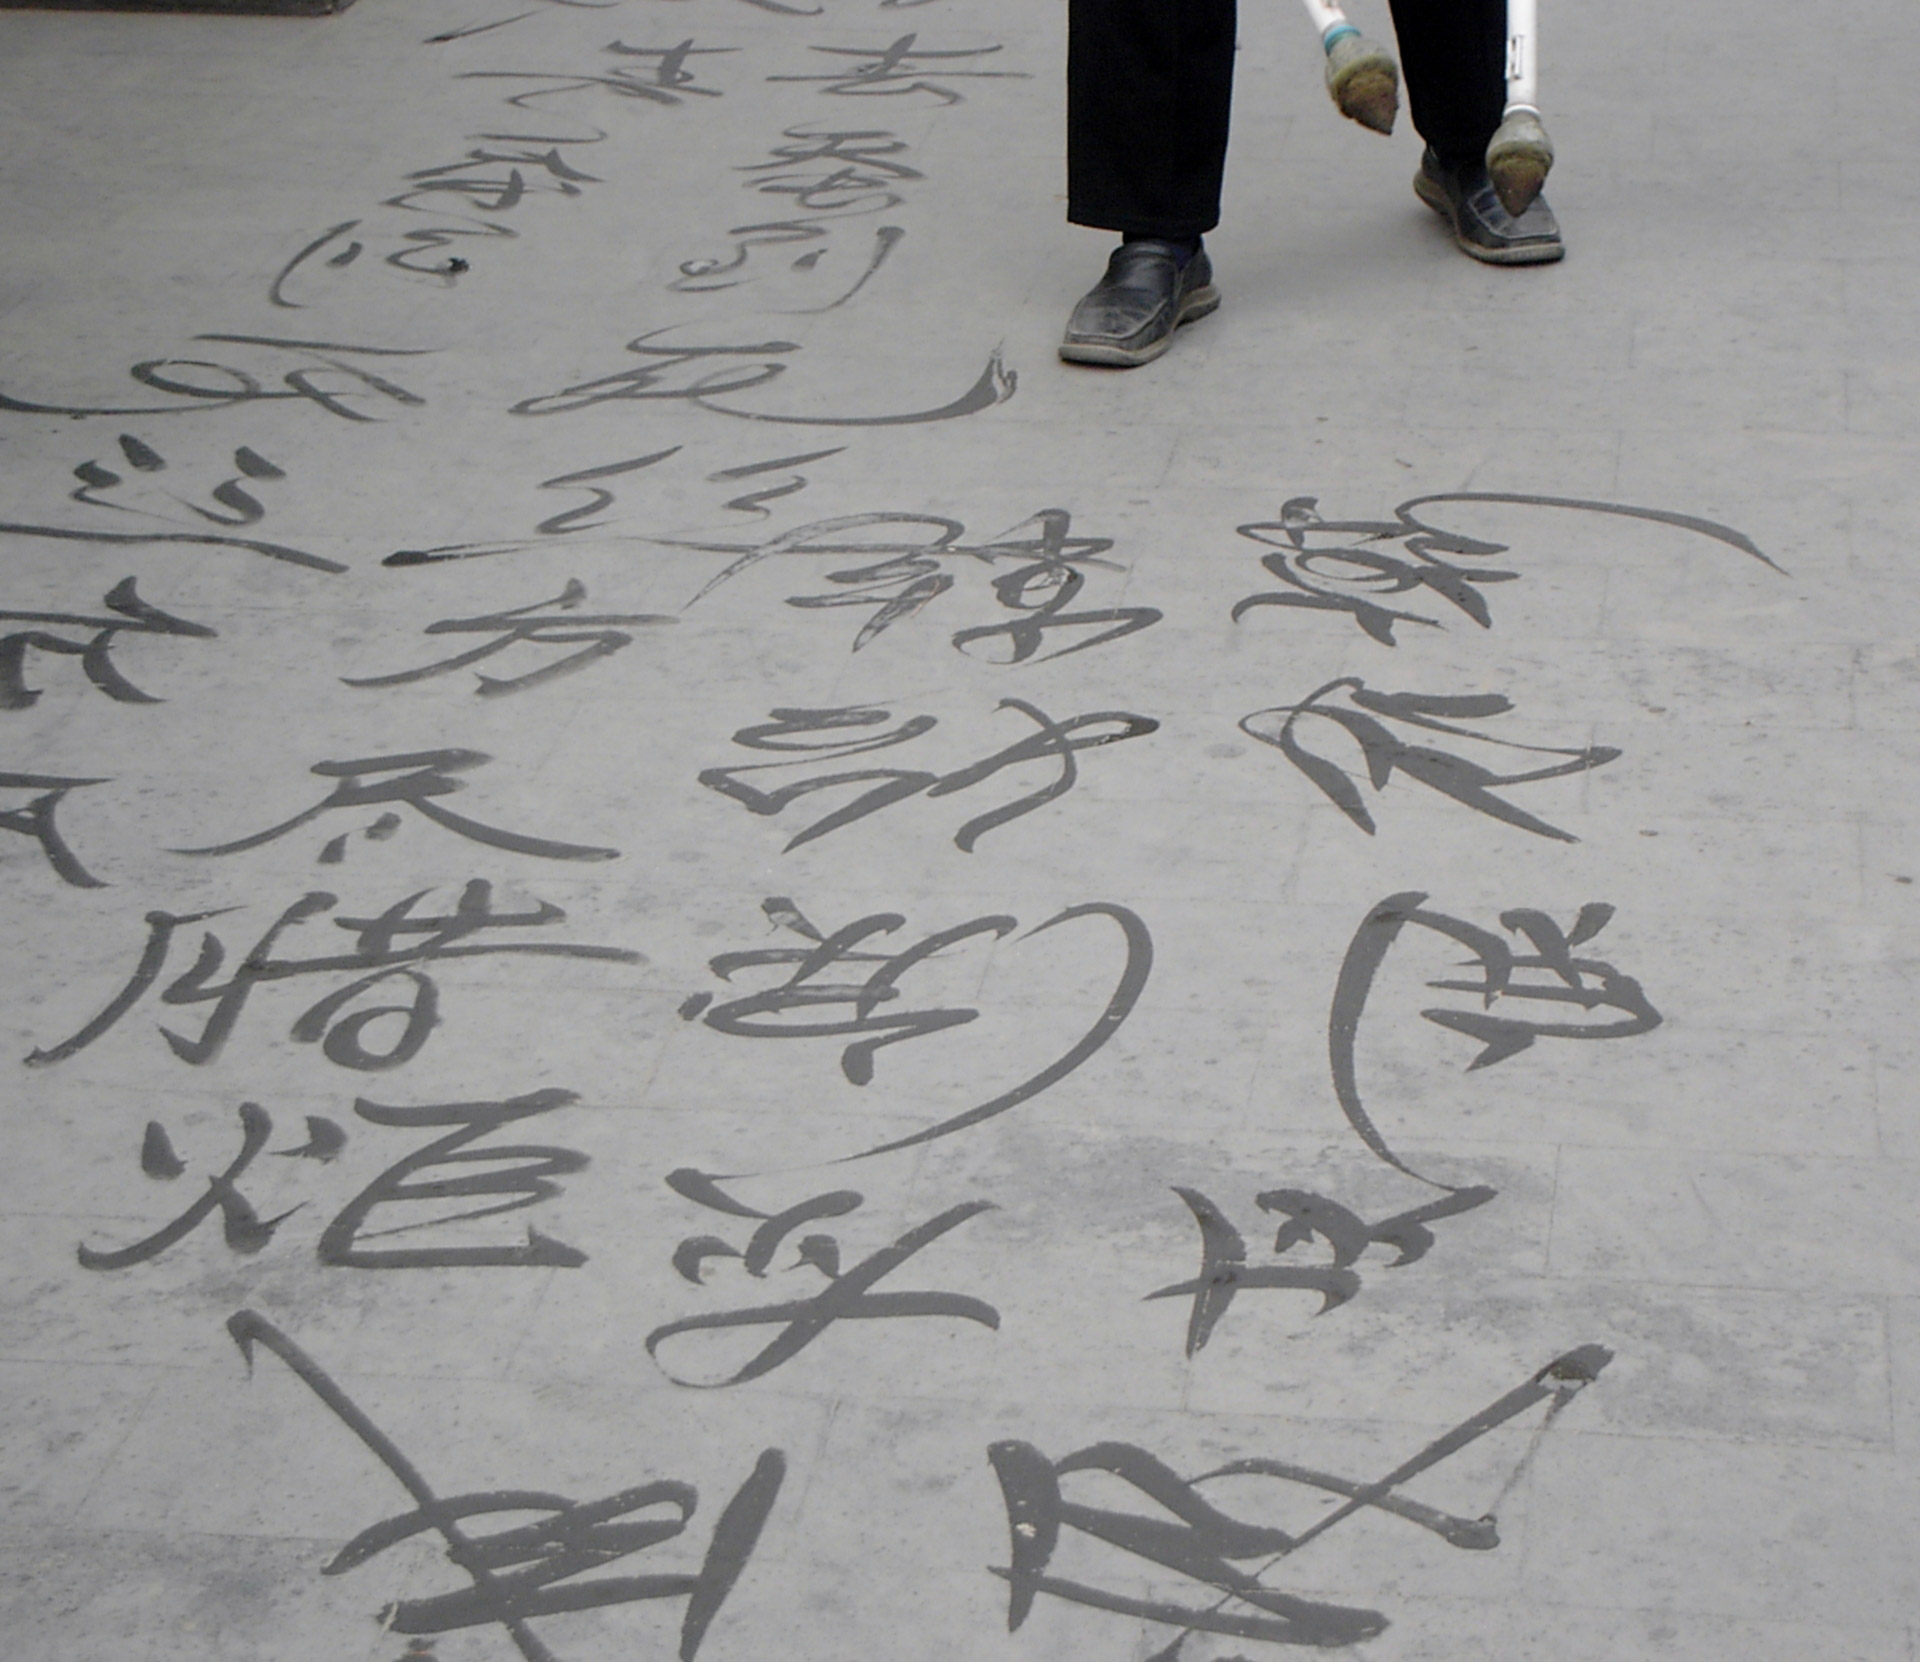 china-writing-calligraphy-letters-chinese-writing-free-image-from